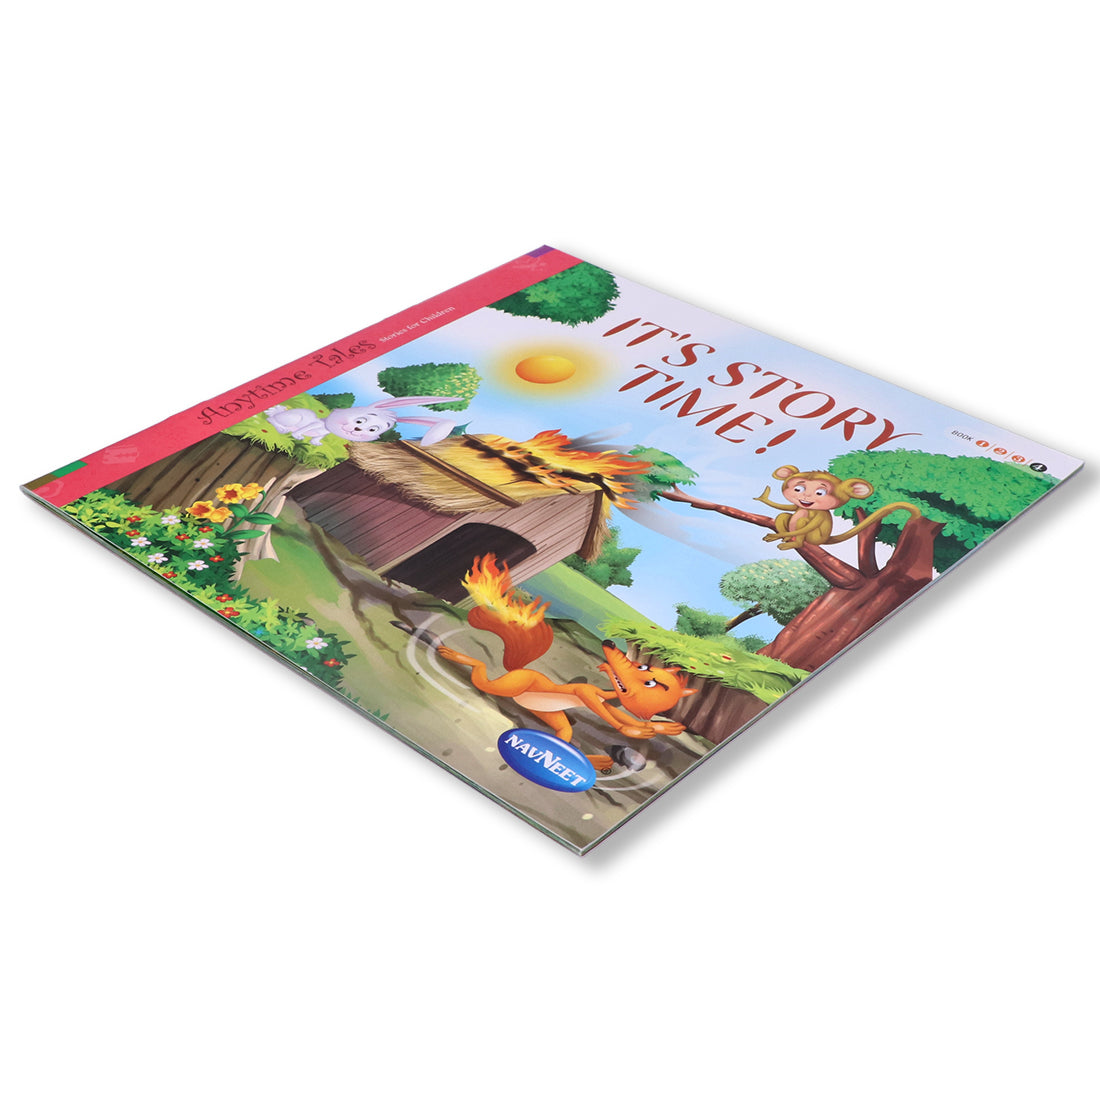 Navneet It's Story Time (Story Books) 1 to 4- Best for building lifetime bond with reading- With Colourful Illustrations- Read aloud stories for kids- Best Library Book Collection